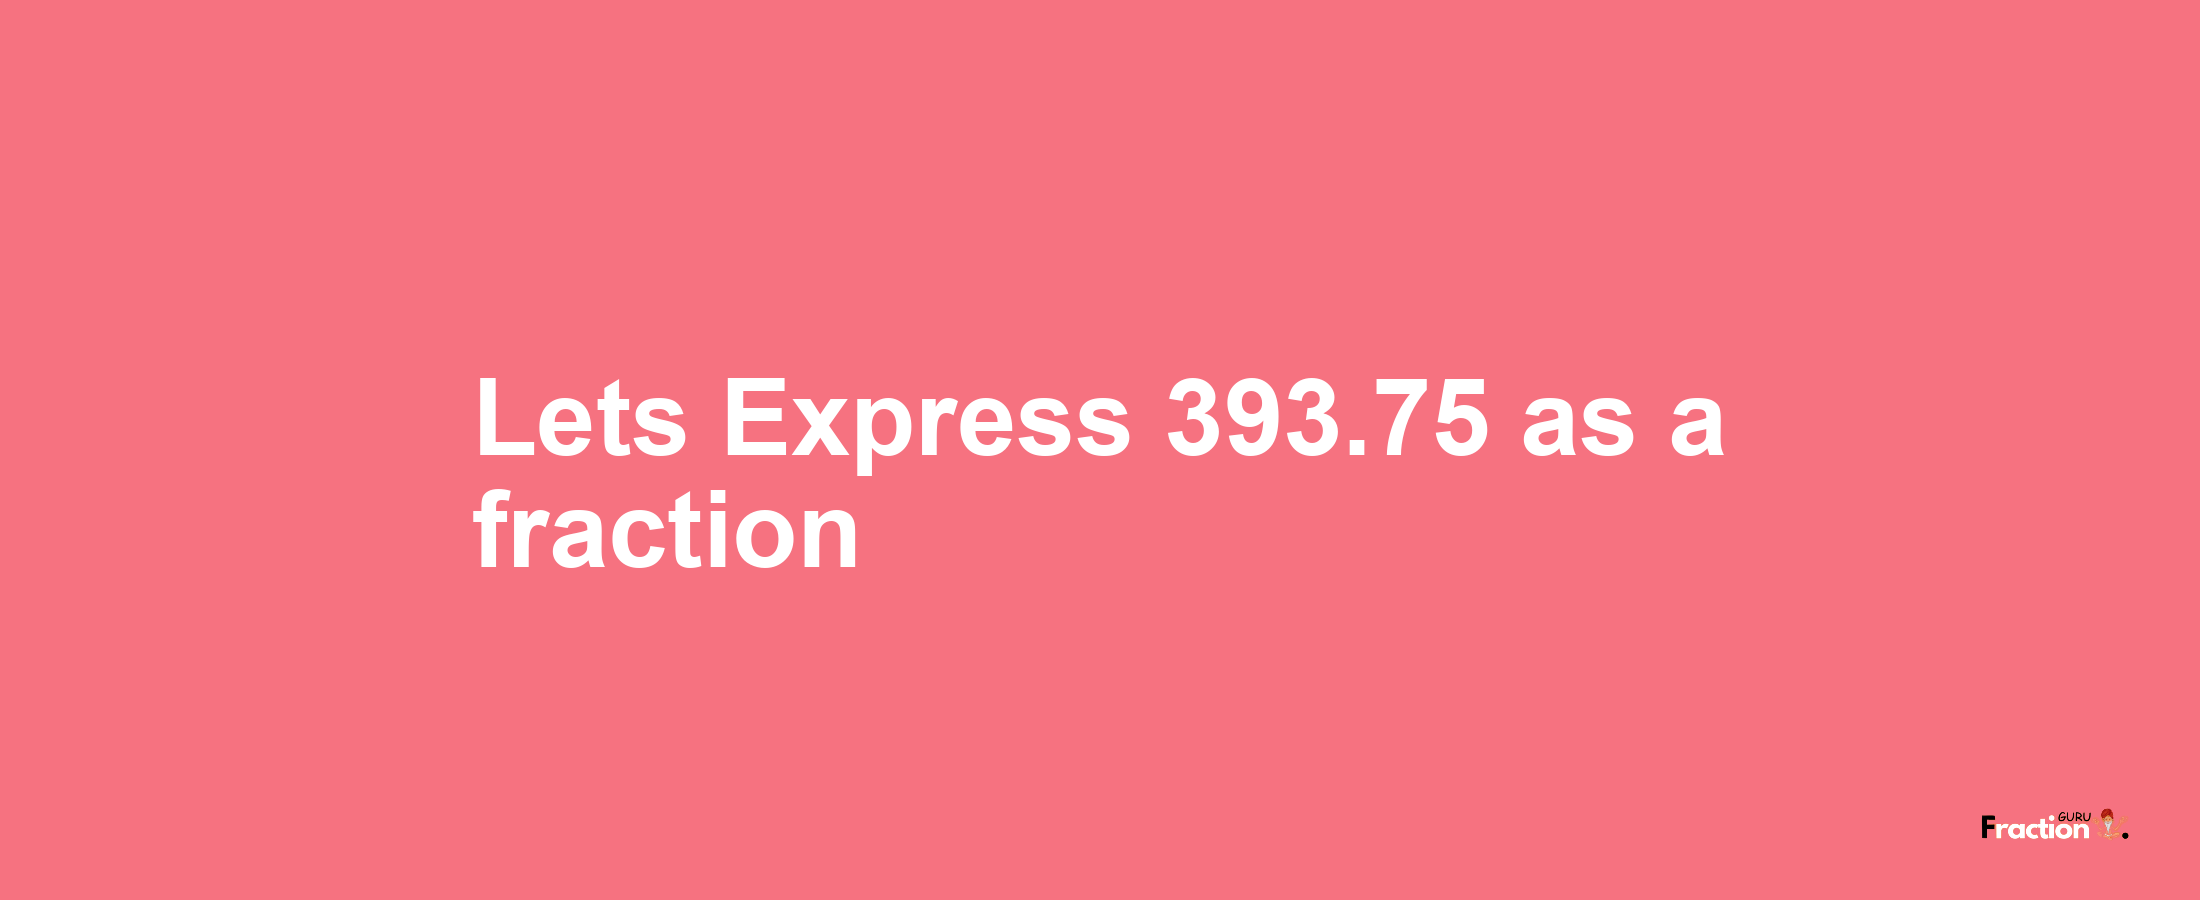 Lets Express 393.75 as afraction